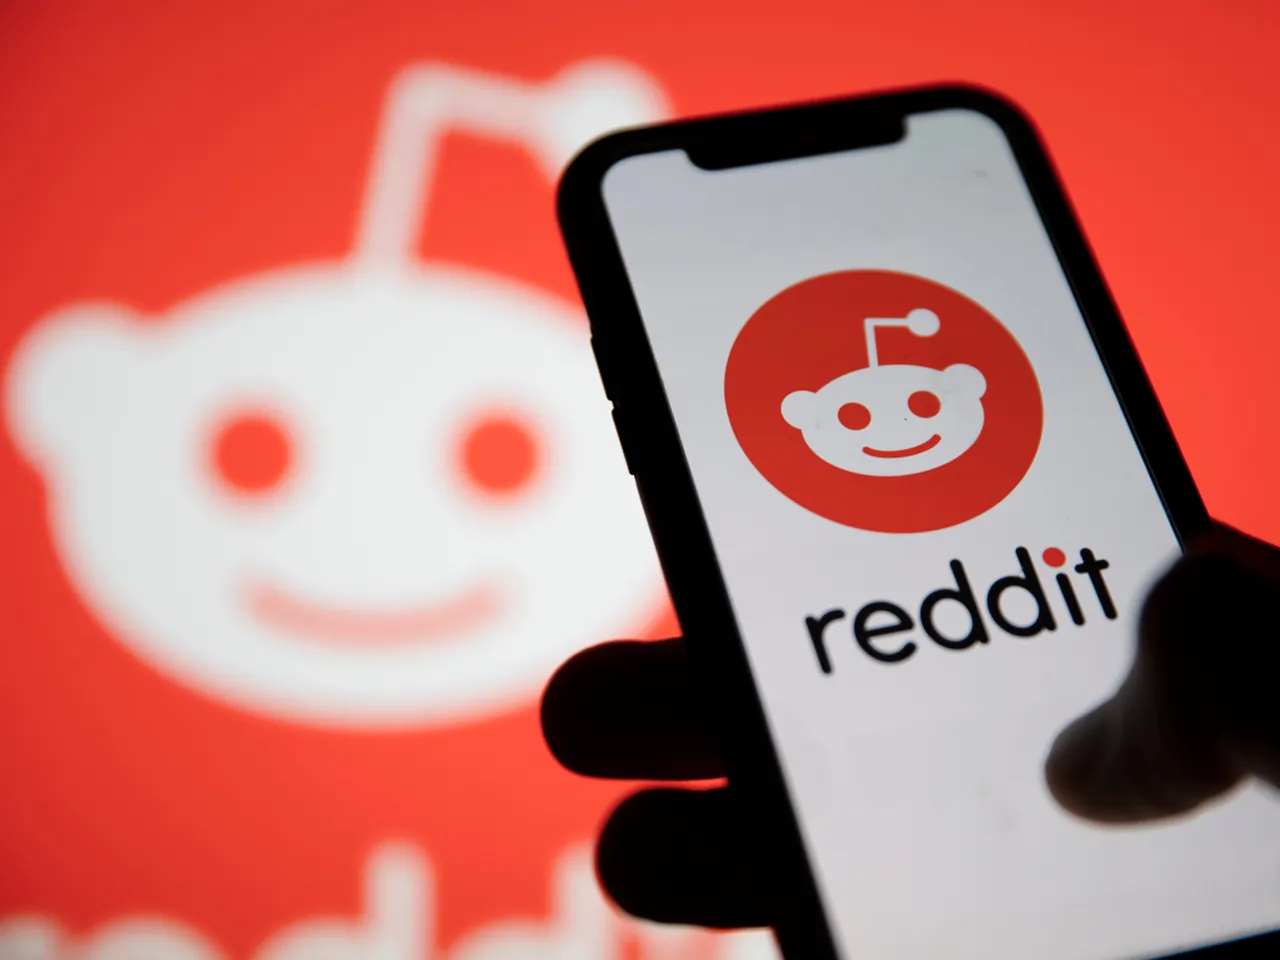 Reddit launches a contributor program to pay users